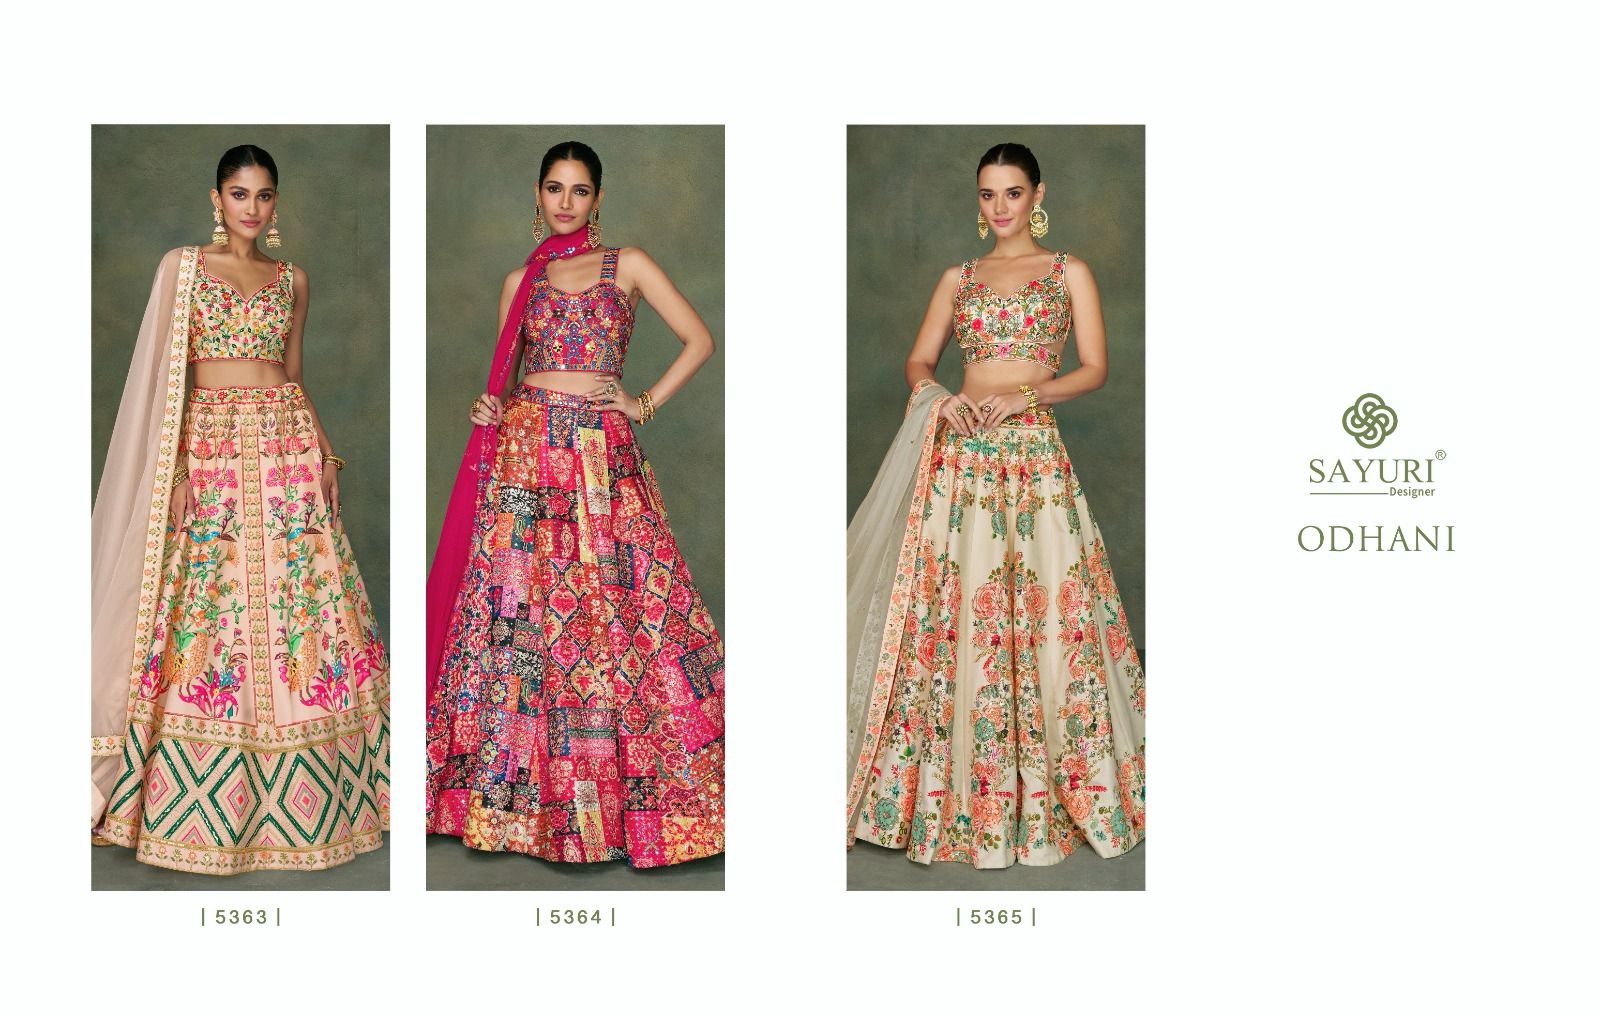 How to Select a Lehenga Choli That Compliments Your Body Type